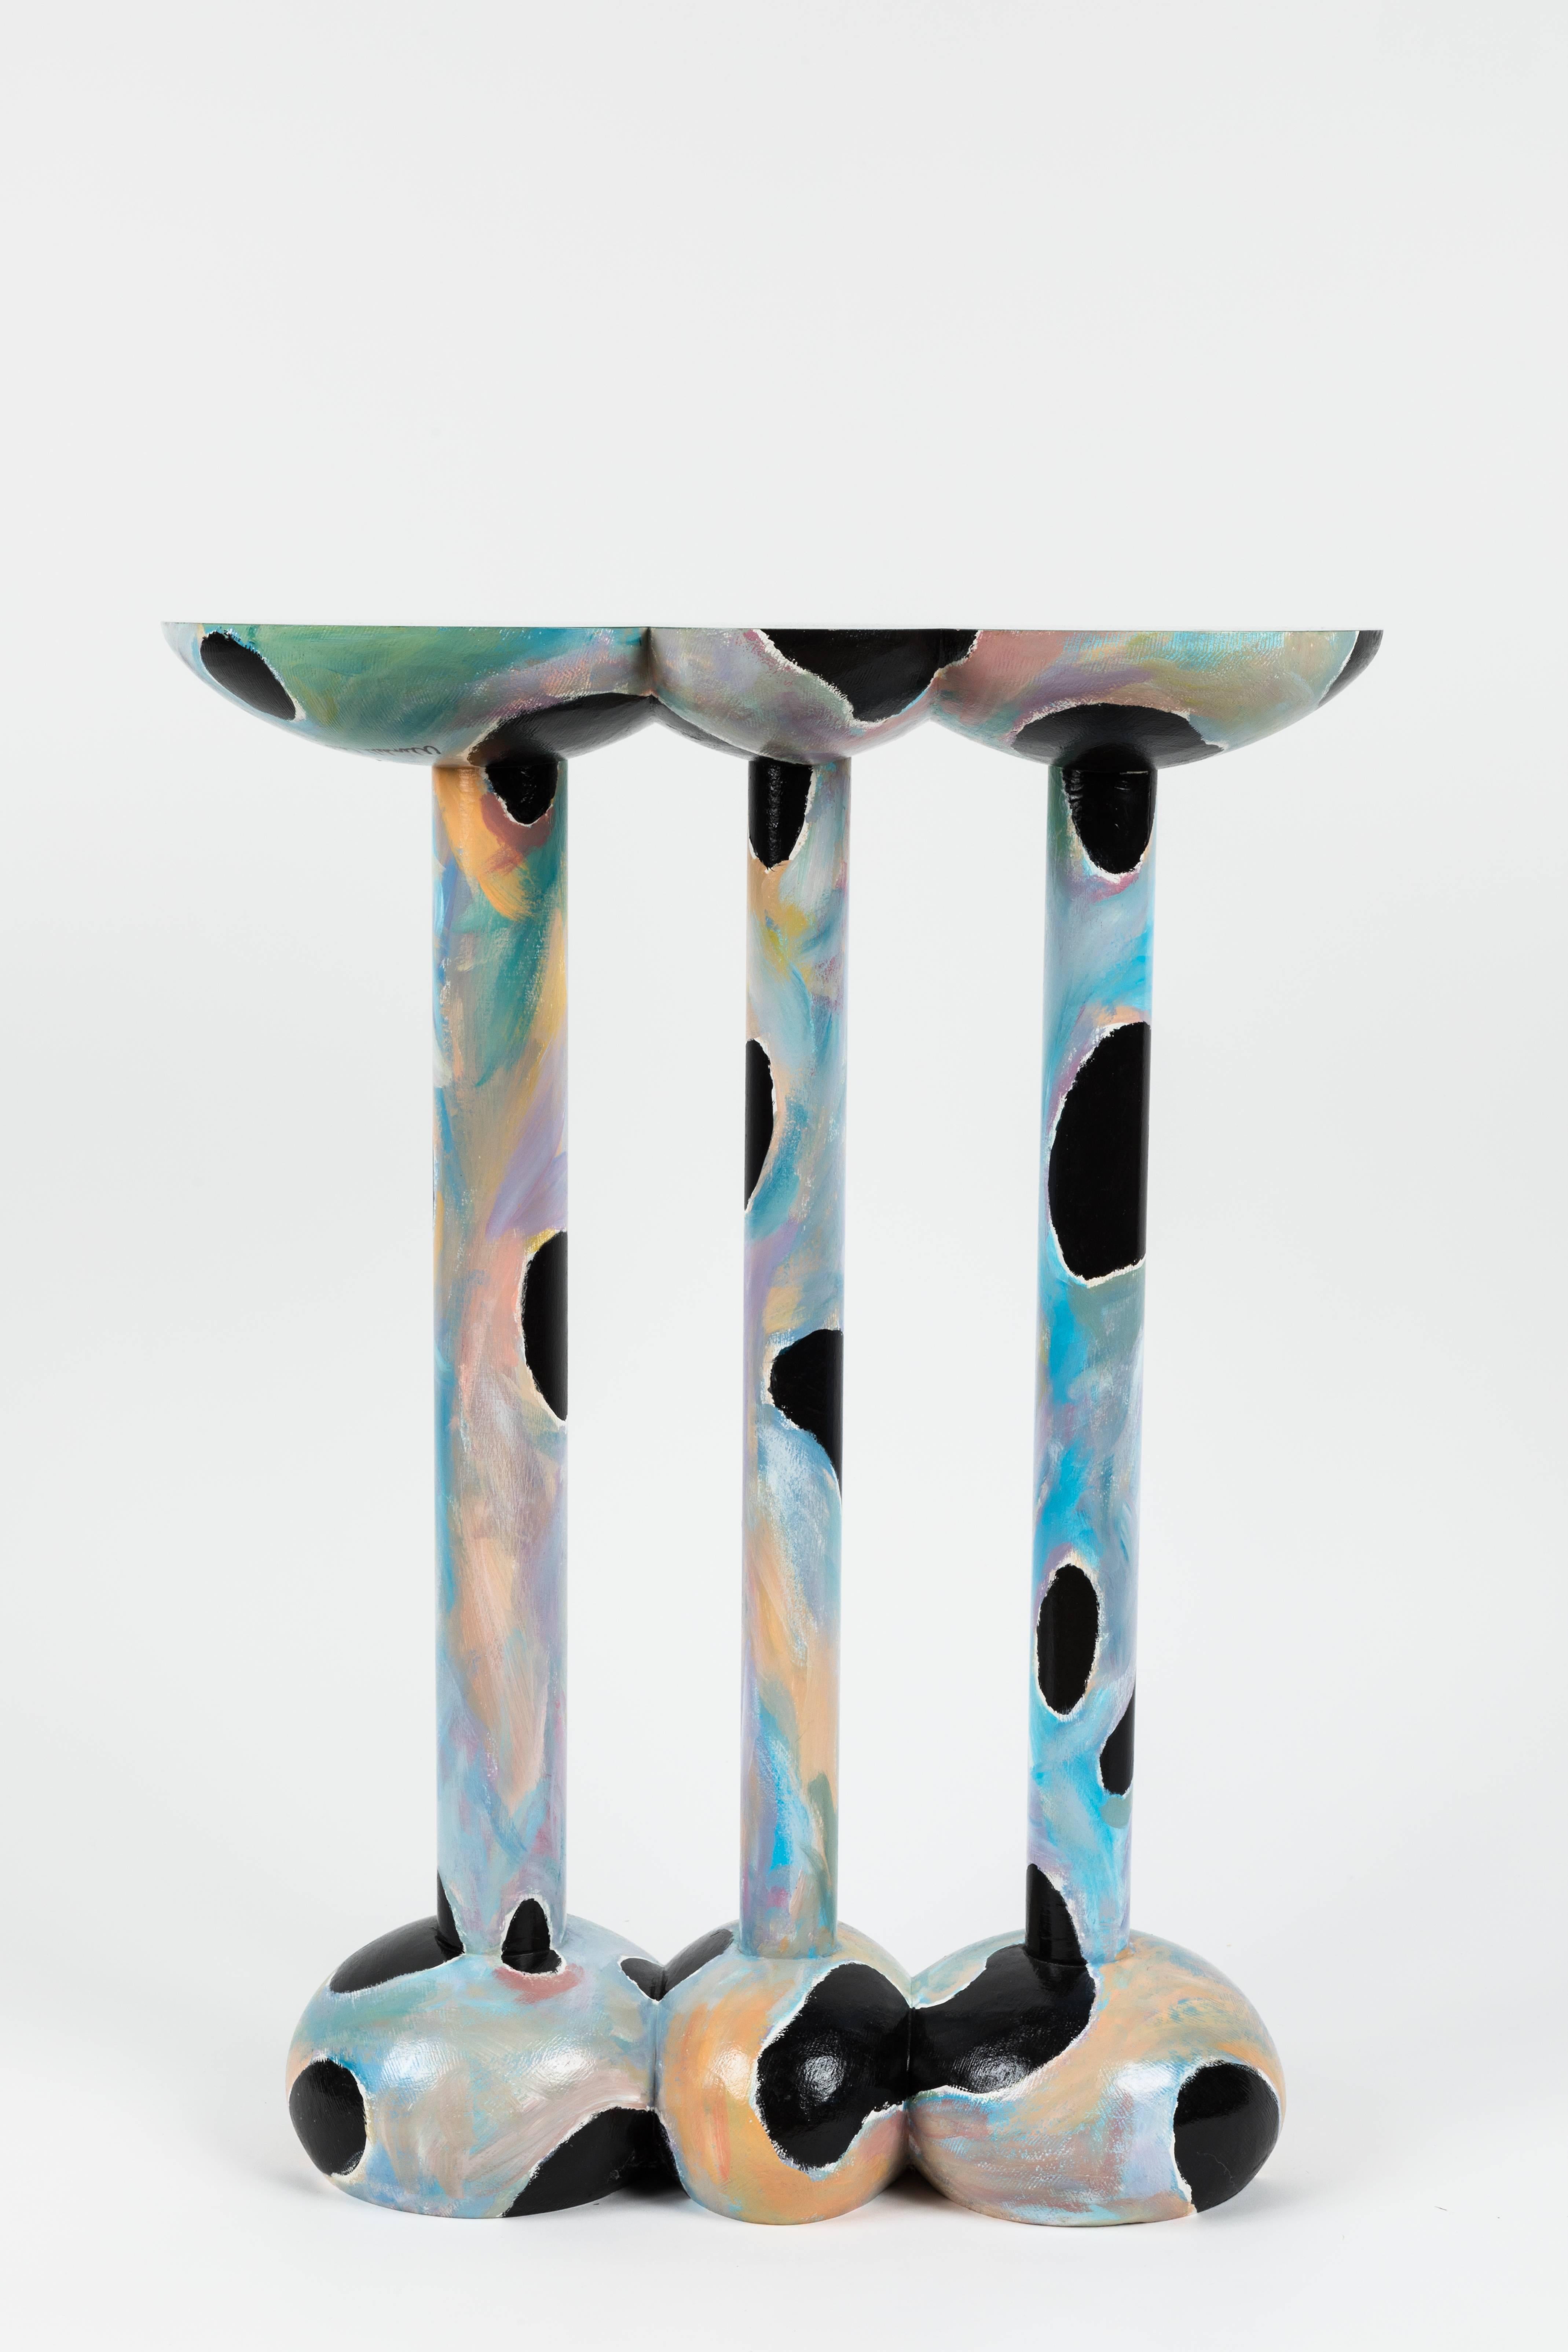 Hand-painted, hand-carved side table by Wendell Castle, American, 1987. This important table is featured in Judith Gura's new book on Postmodern design. Signed and dated.